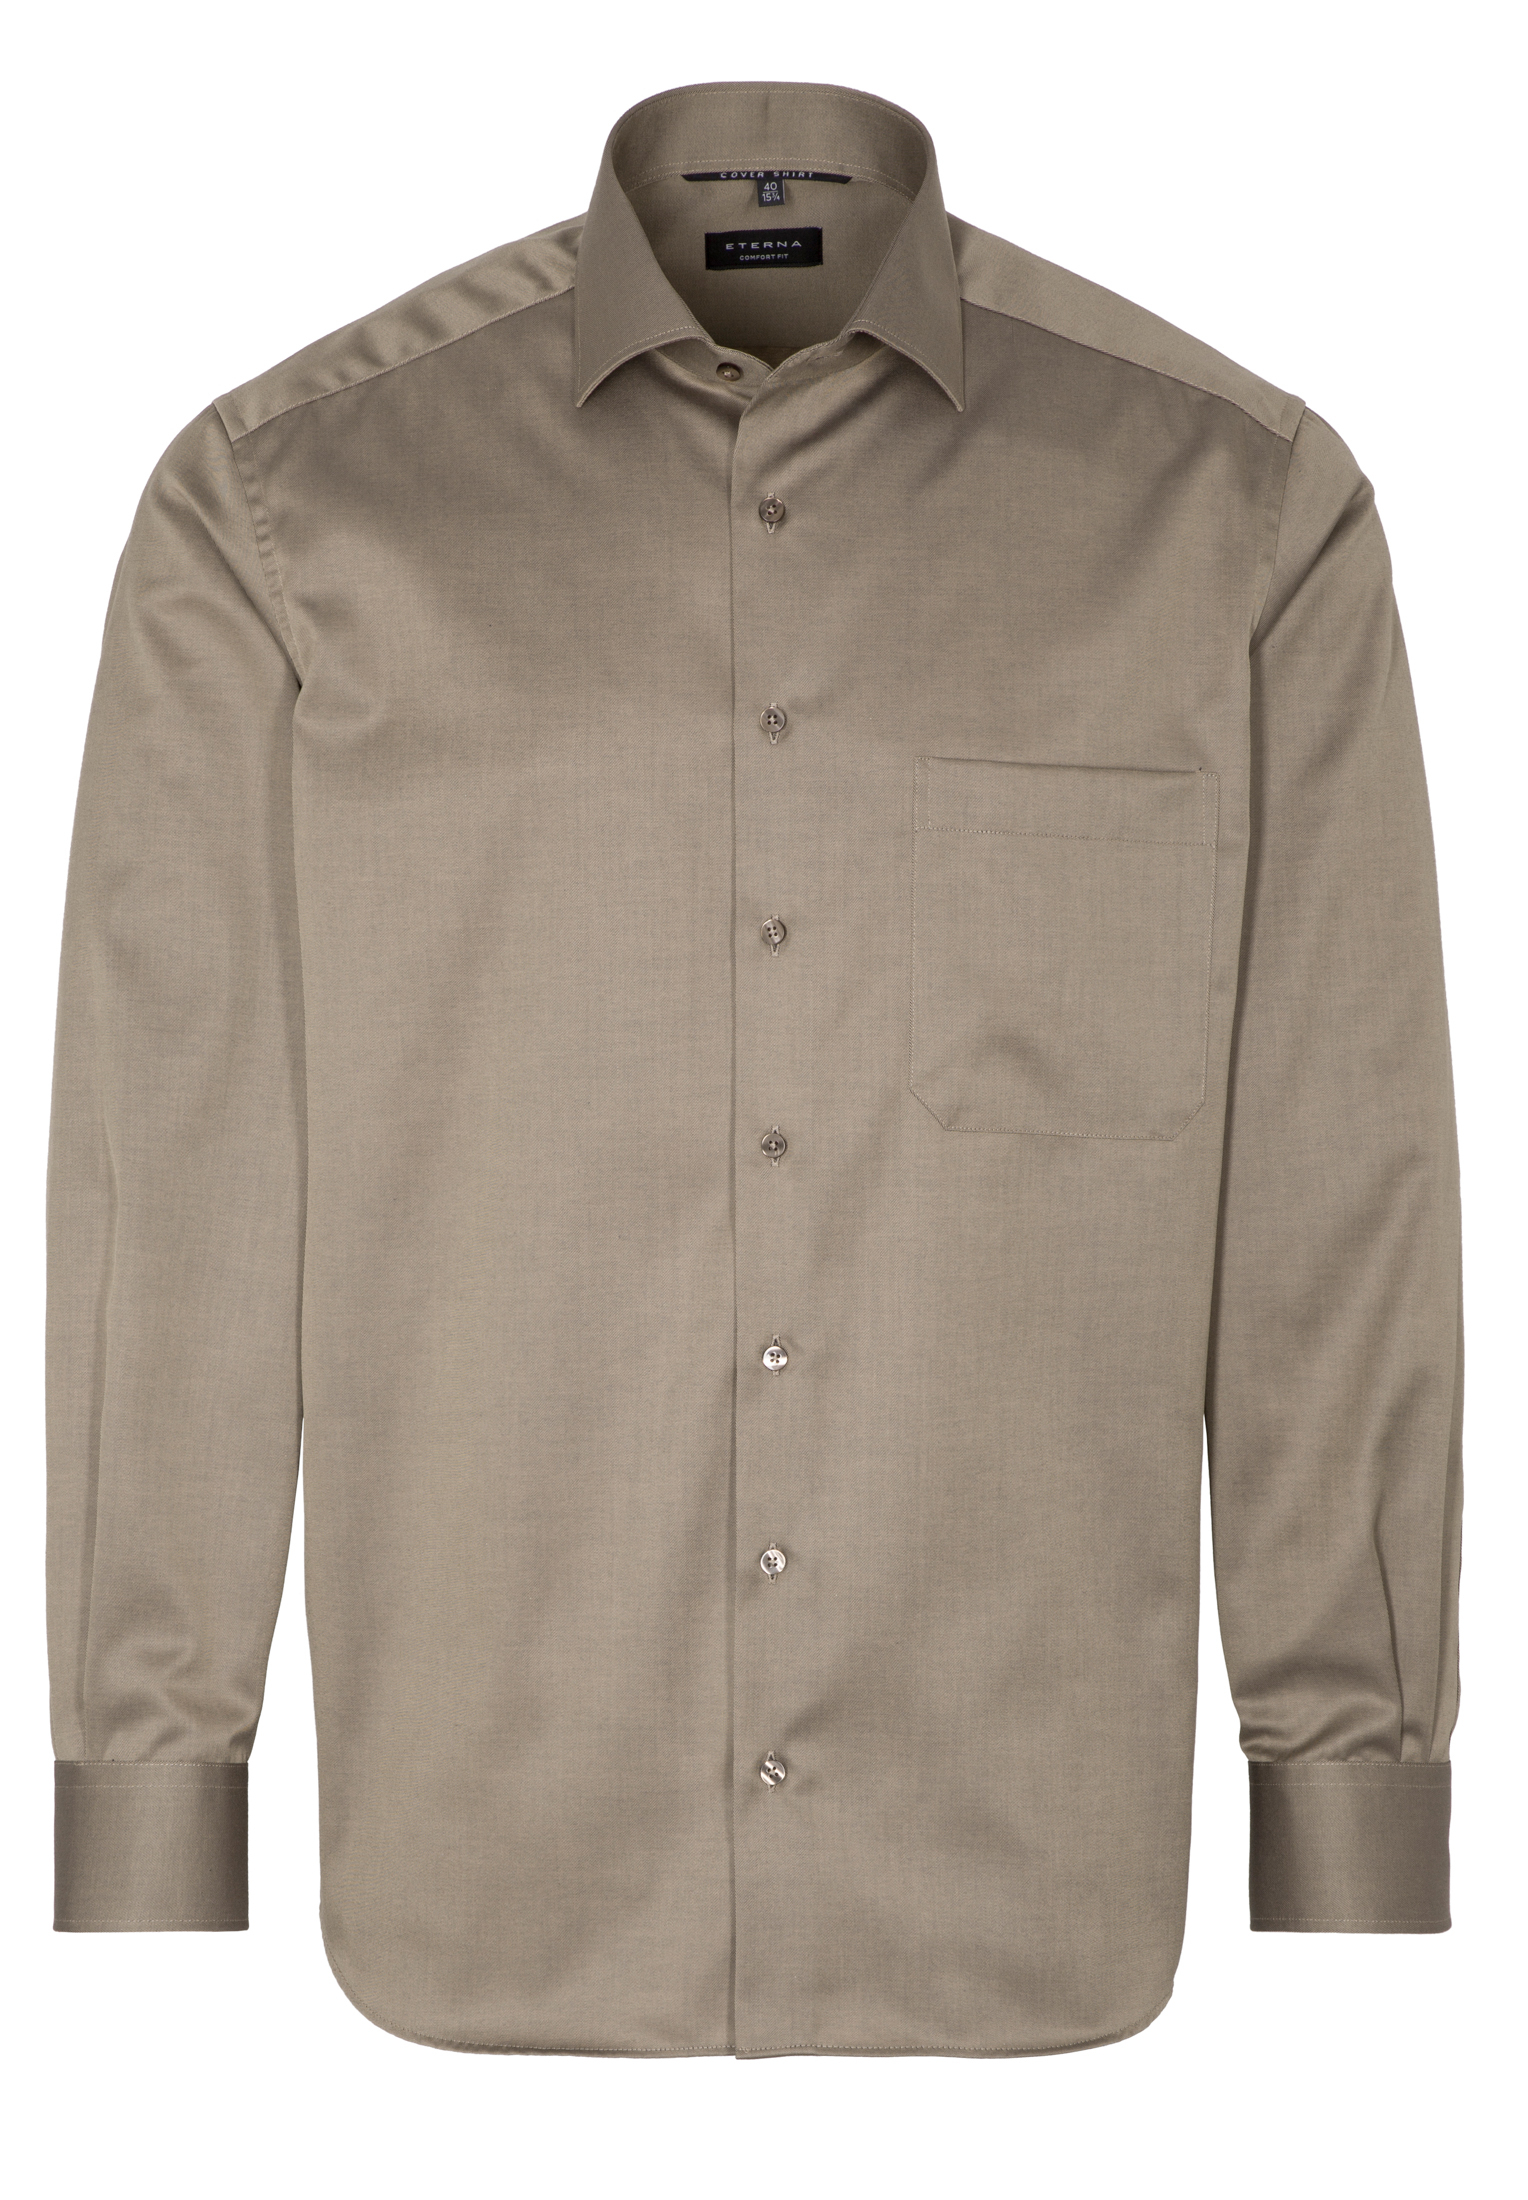 COMFORT FIT Cover Shirt in brown plain